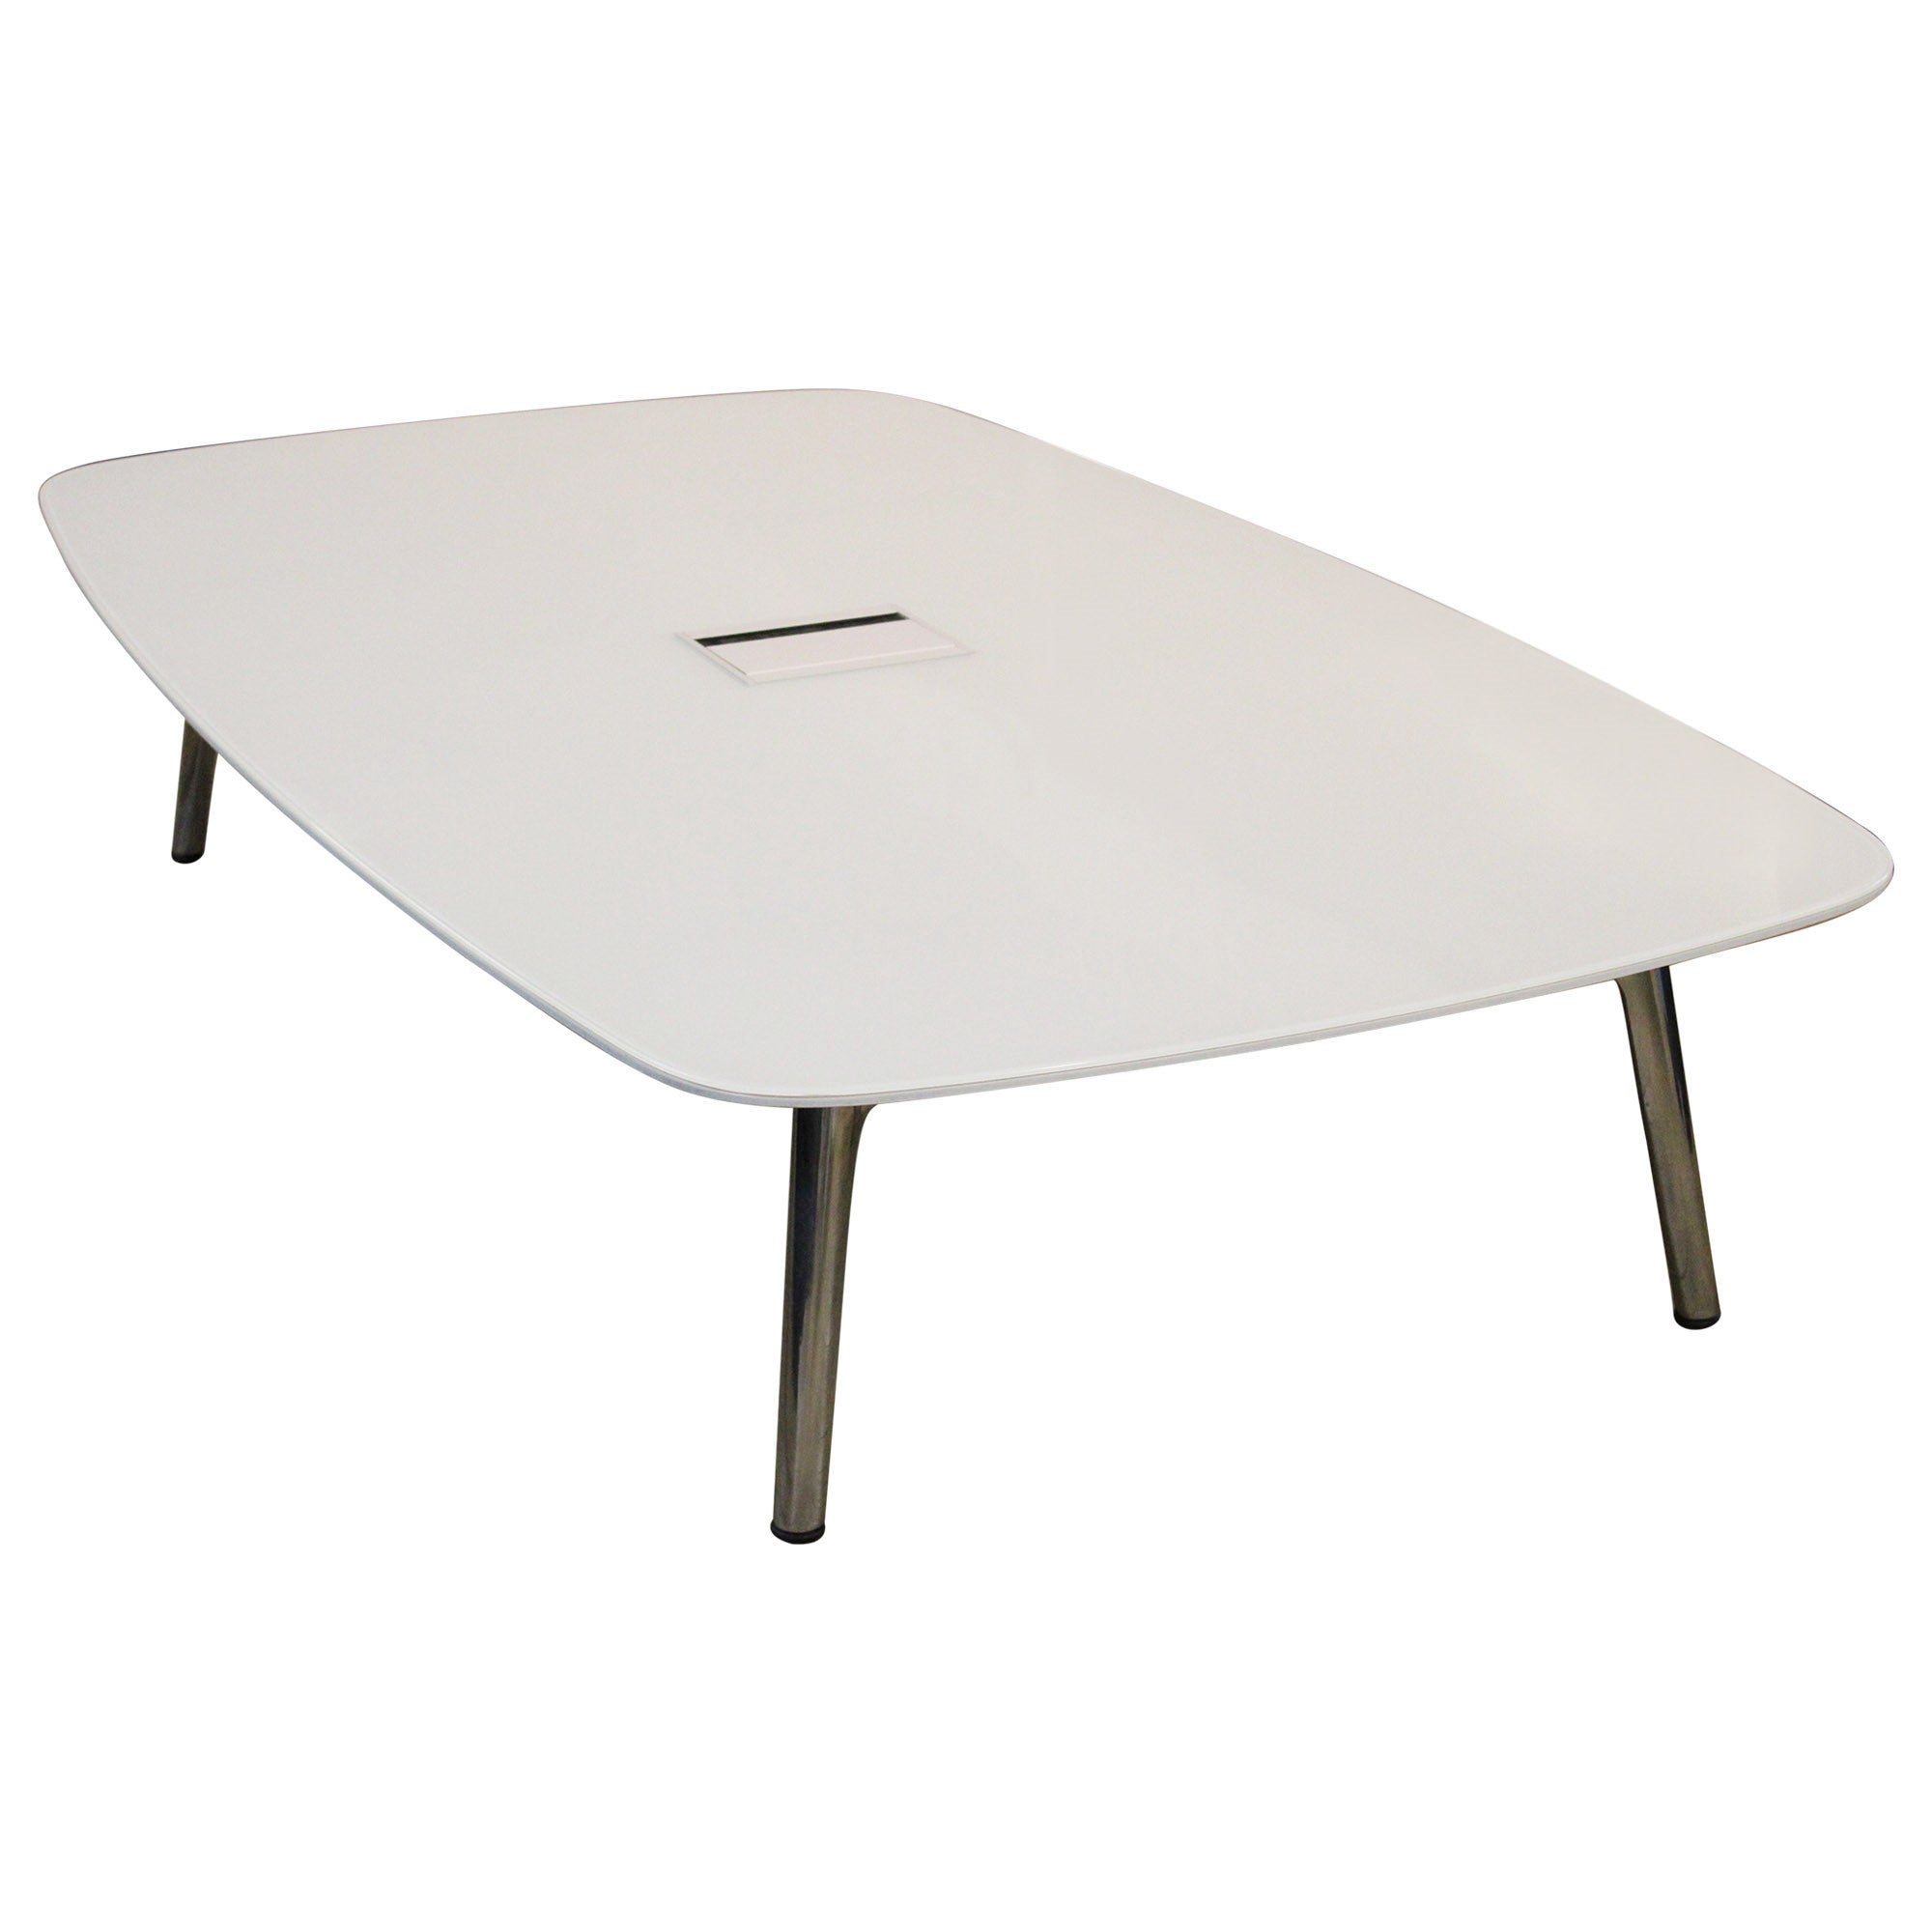 Collaborative Coffee Table, White - Preowned